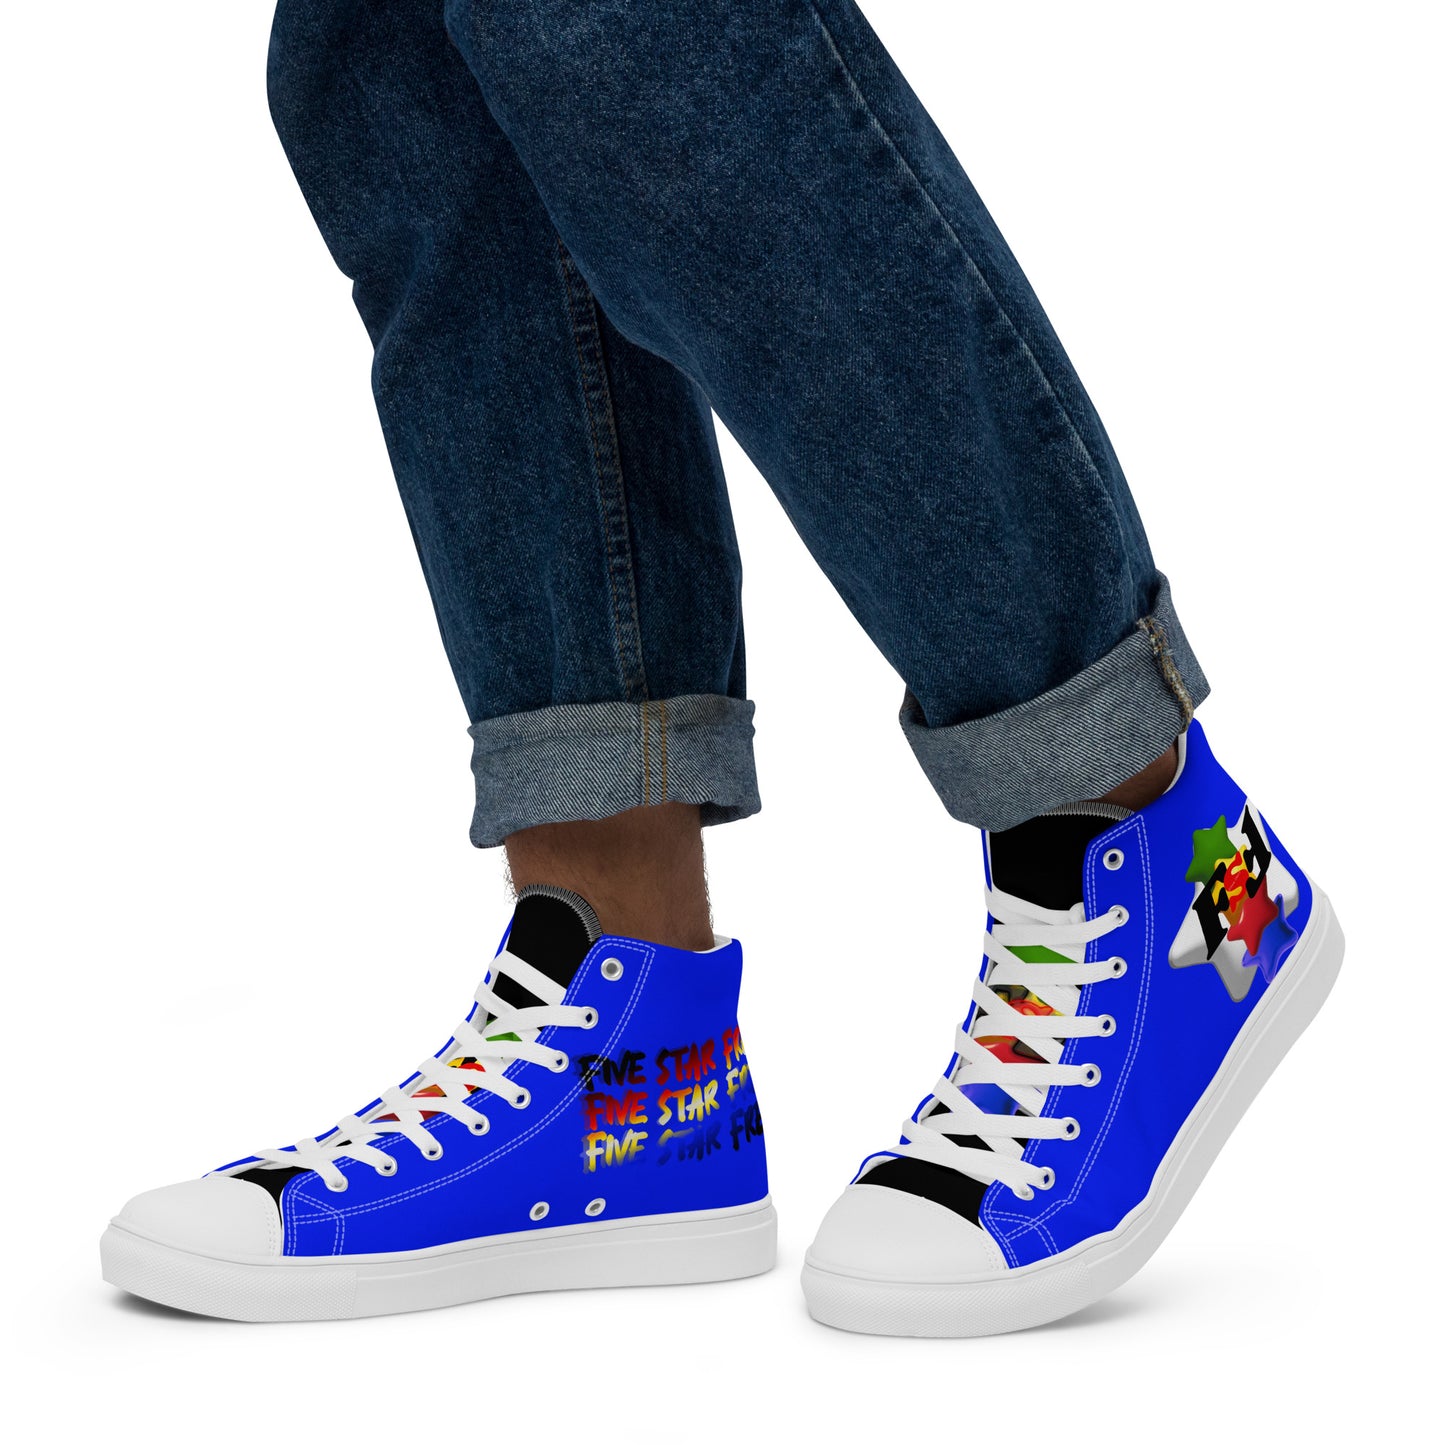 Men’s high top canvas shoes - FSF Stacked 'White Star' Blue